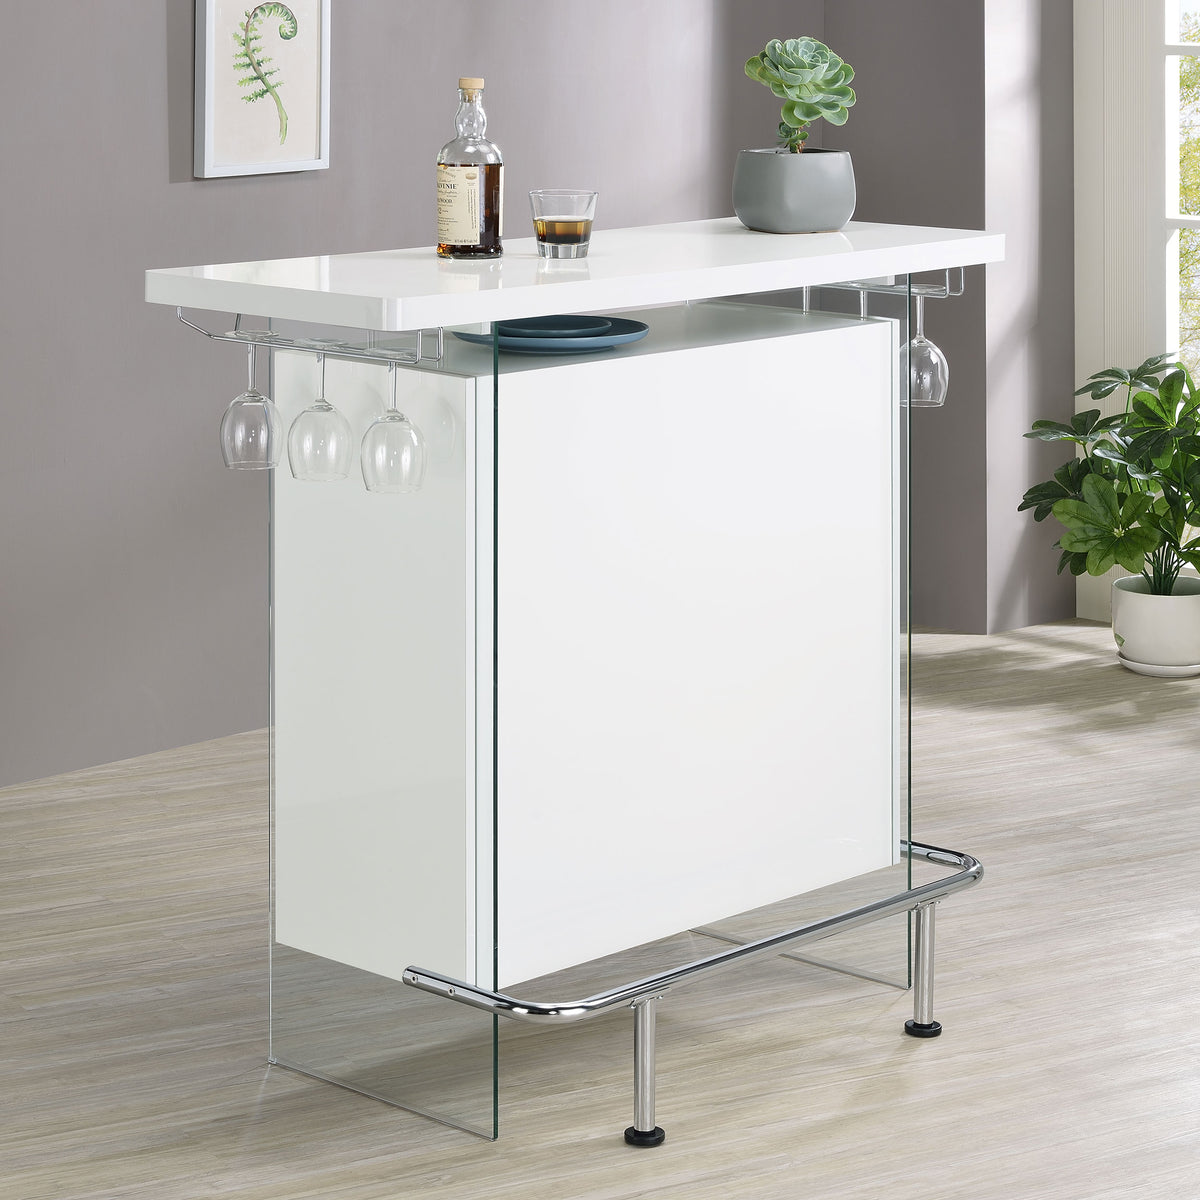 Acosta Rectangular Bar Unit with Footrest and Glass Side Panels Acosta Rectangular Bar Unit with Footrest and Glass Side Panels Half Price Furniture